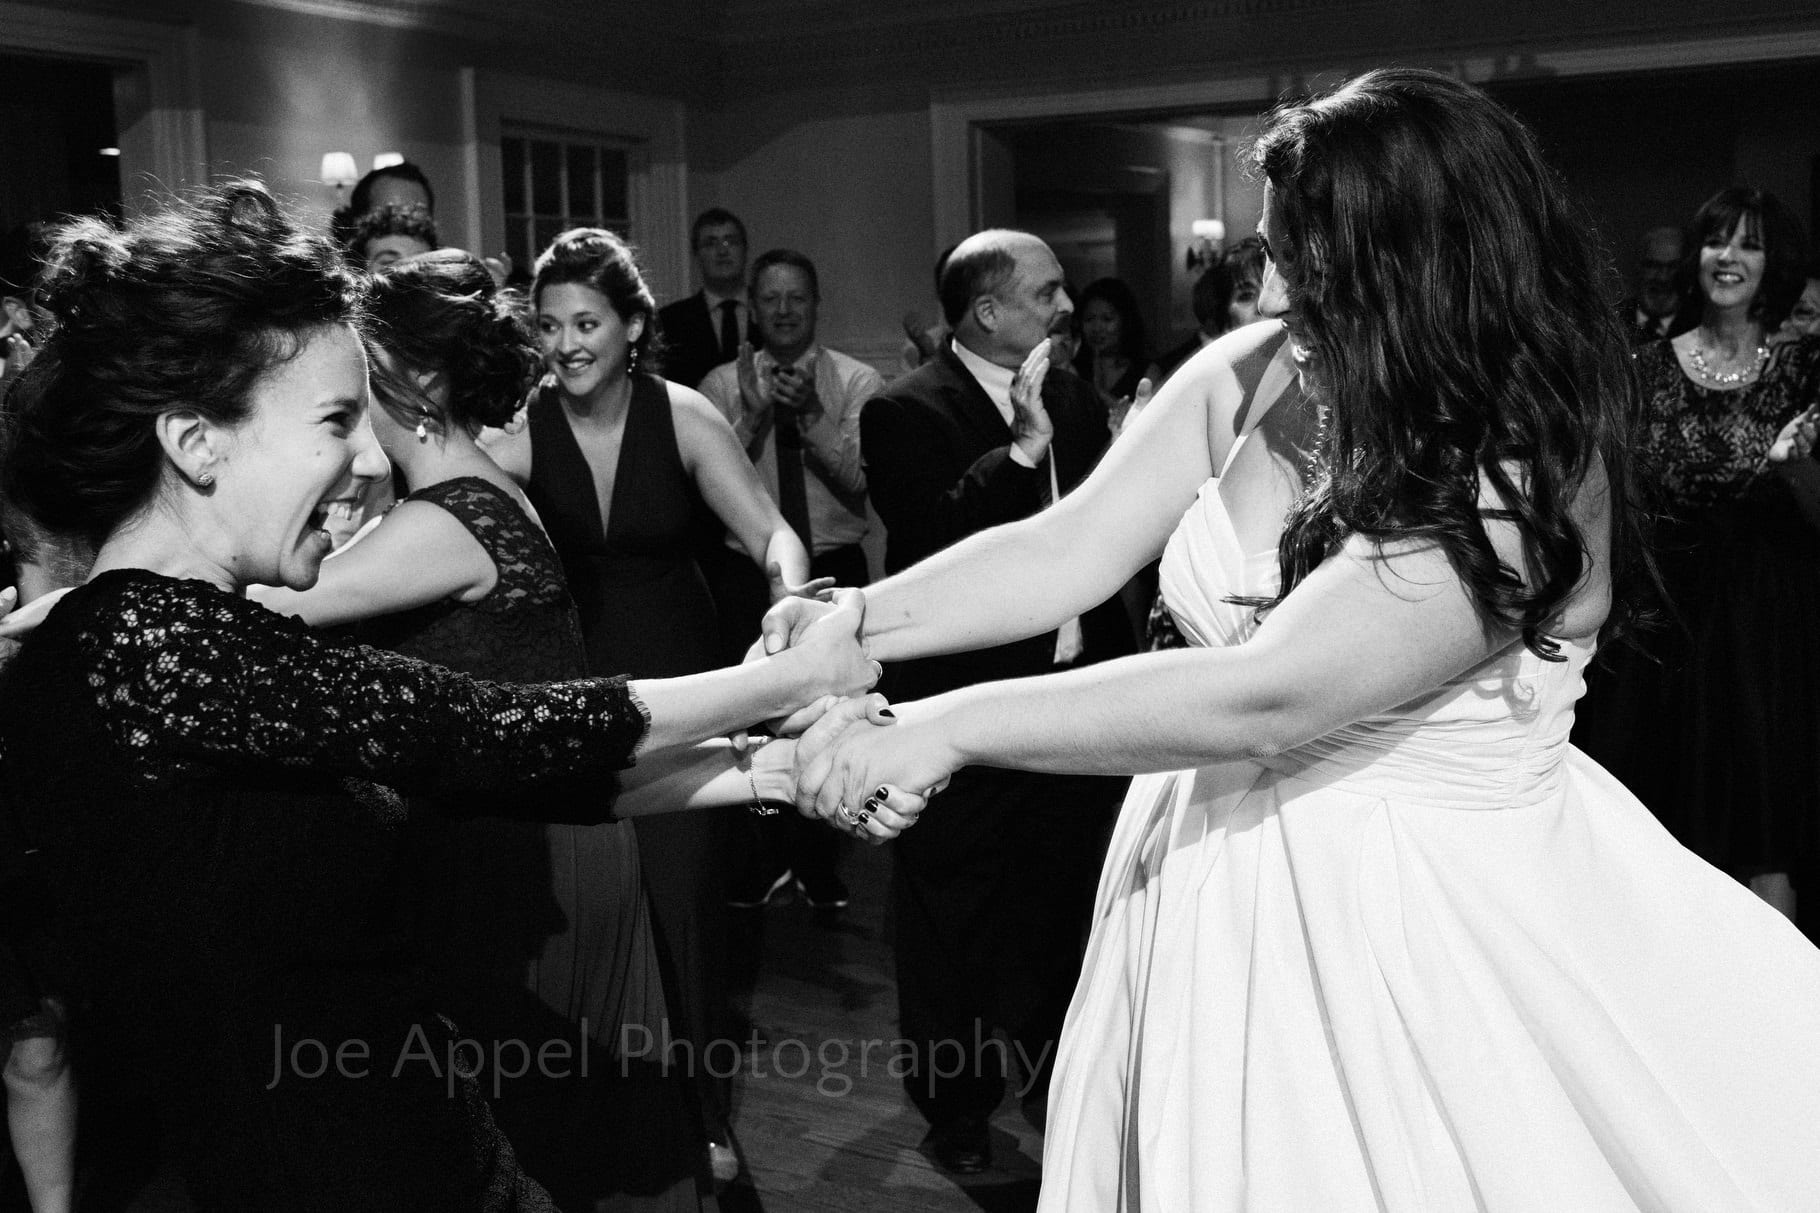 Bride holds hands with another woman as they spin around in a circle while dancing